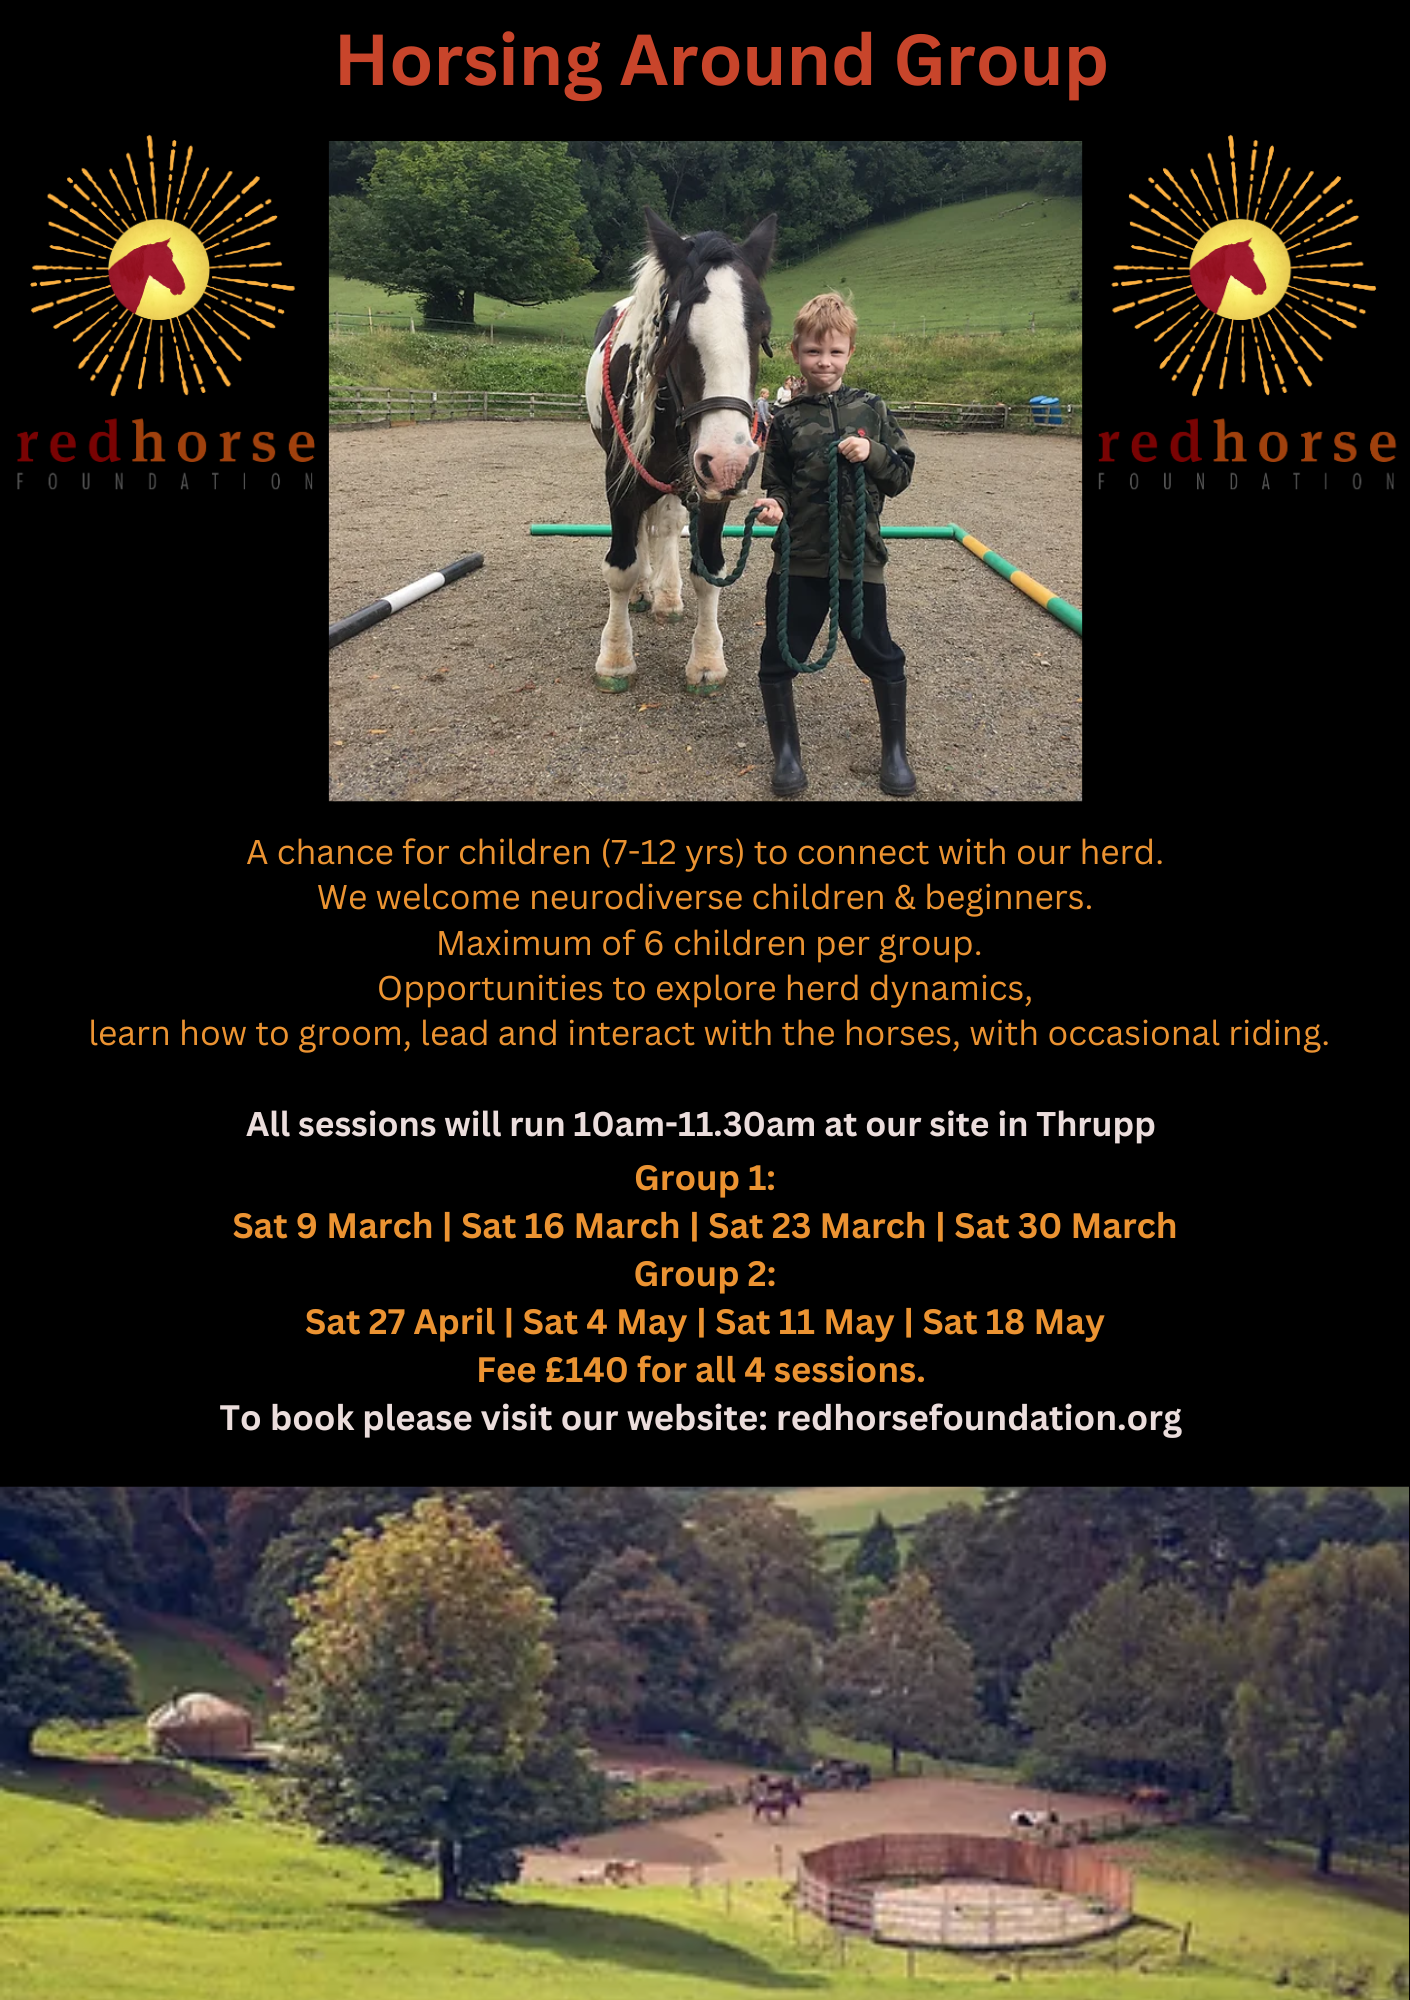 Poster for Horsing Around Events . Photo of a child and a horse. A chance for children to connect with our herd. We welcome neurodiverse children and beginner's. A maximum of 6 children per group. Opportunities to explore herd dynamics, learn how to groom, lead and interact with the horses. All sessions will run 10am-11.30am at our site in Thrupp. Group 1 Dates in March, Saturdays, 9th, 16th, 23rd and 30th. Groups 2 dates: Saturdays 27th of April, 4th of May, 11th of May and 18th of May. Fee is £140 for all 4 sessions. To book please visit our website: redhorsefoundation.org